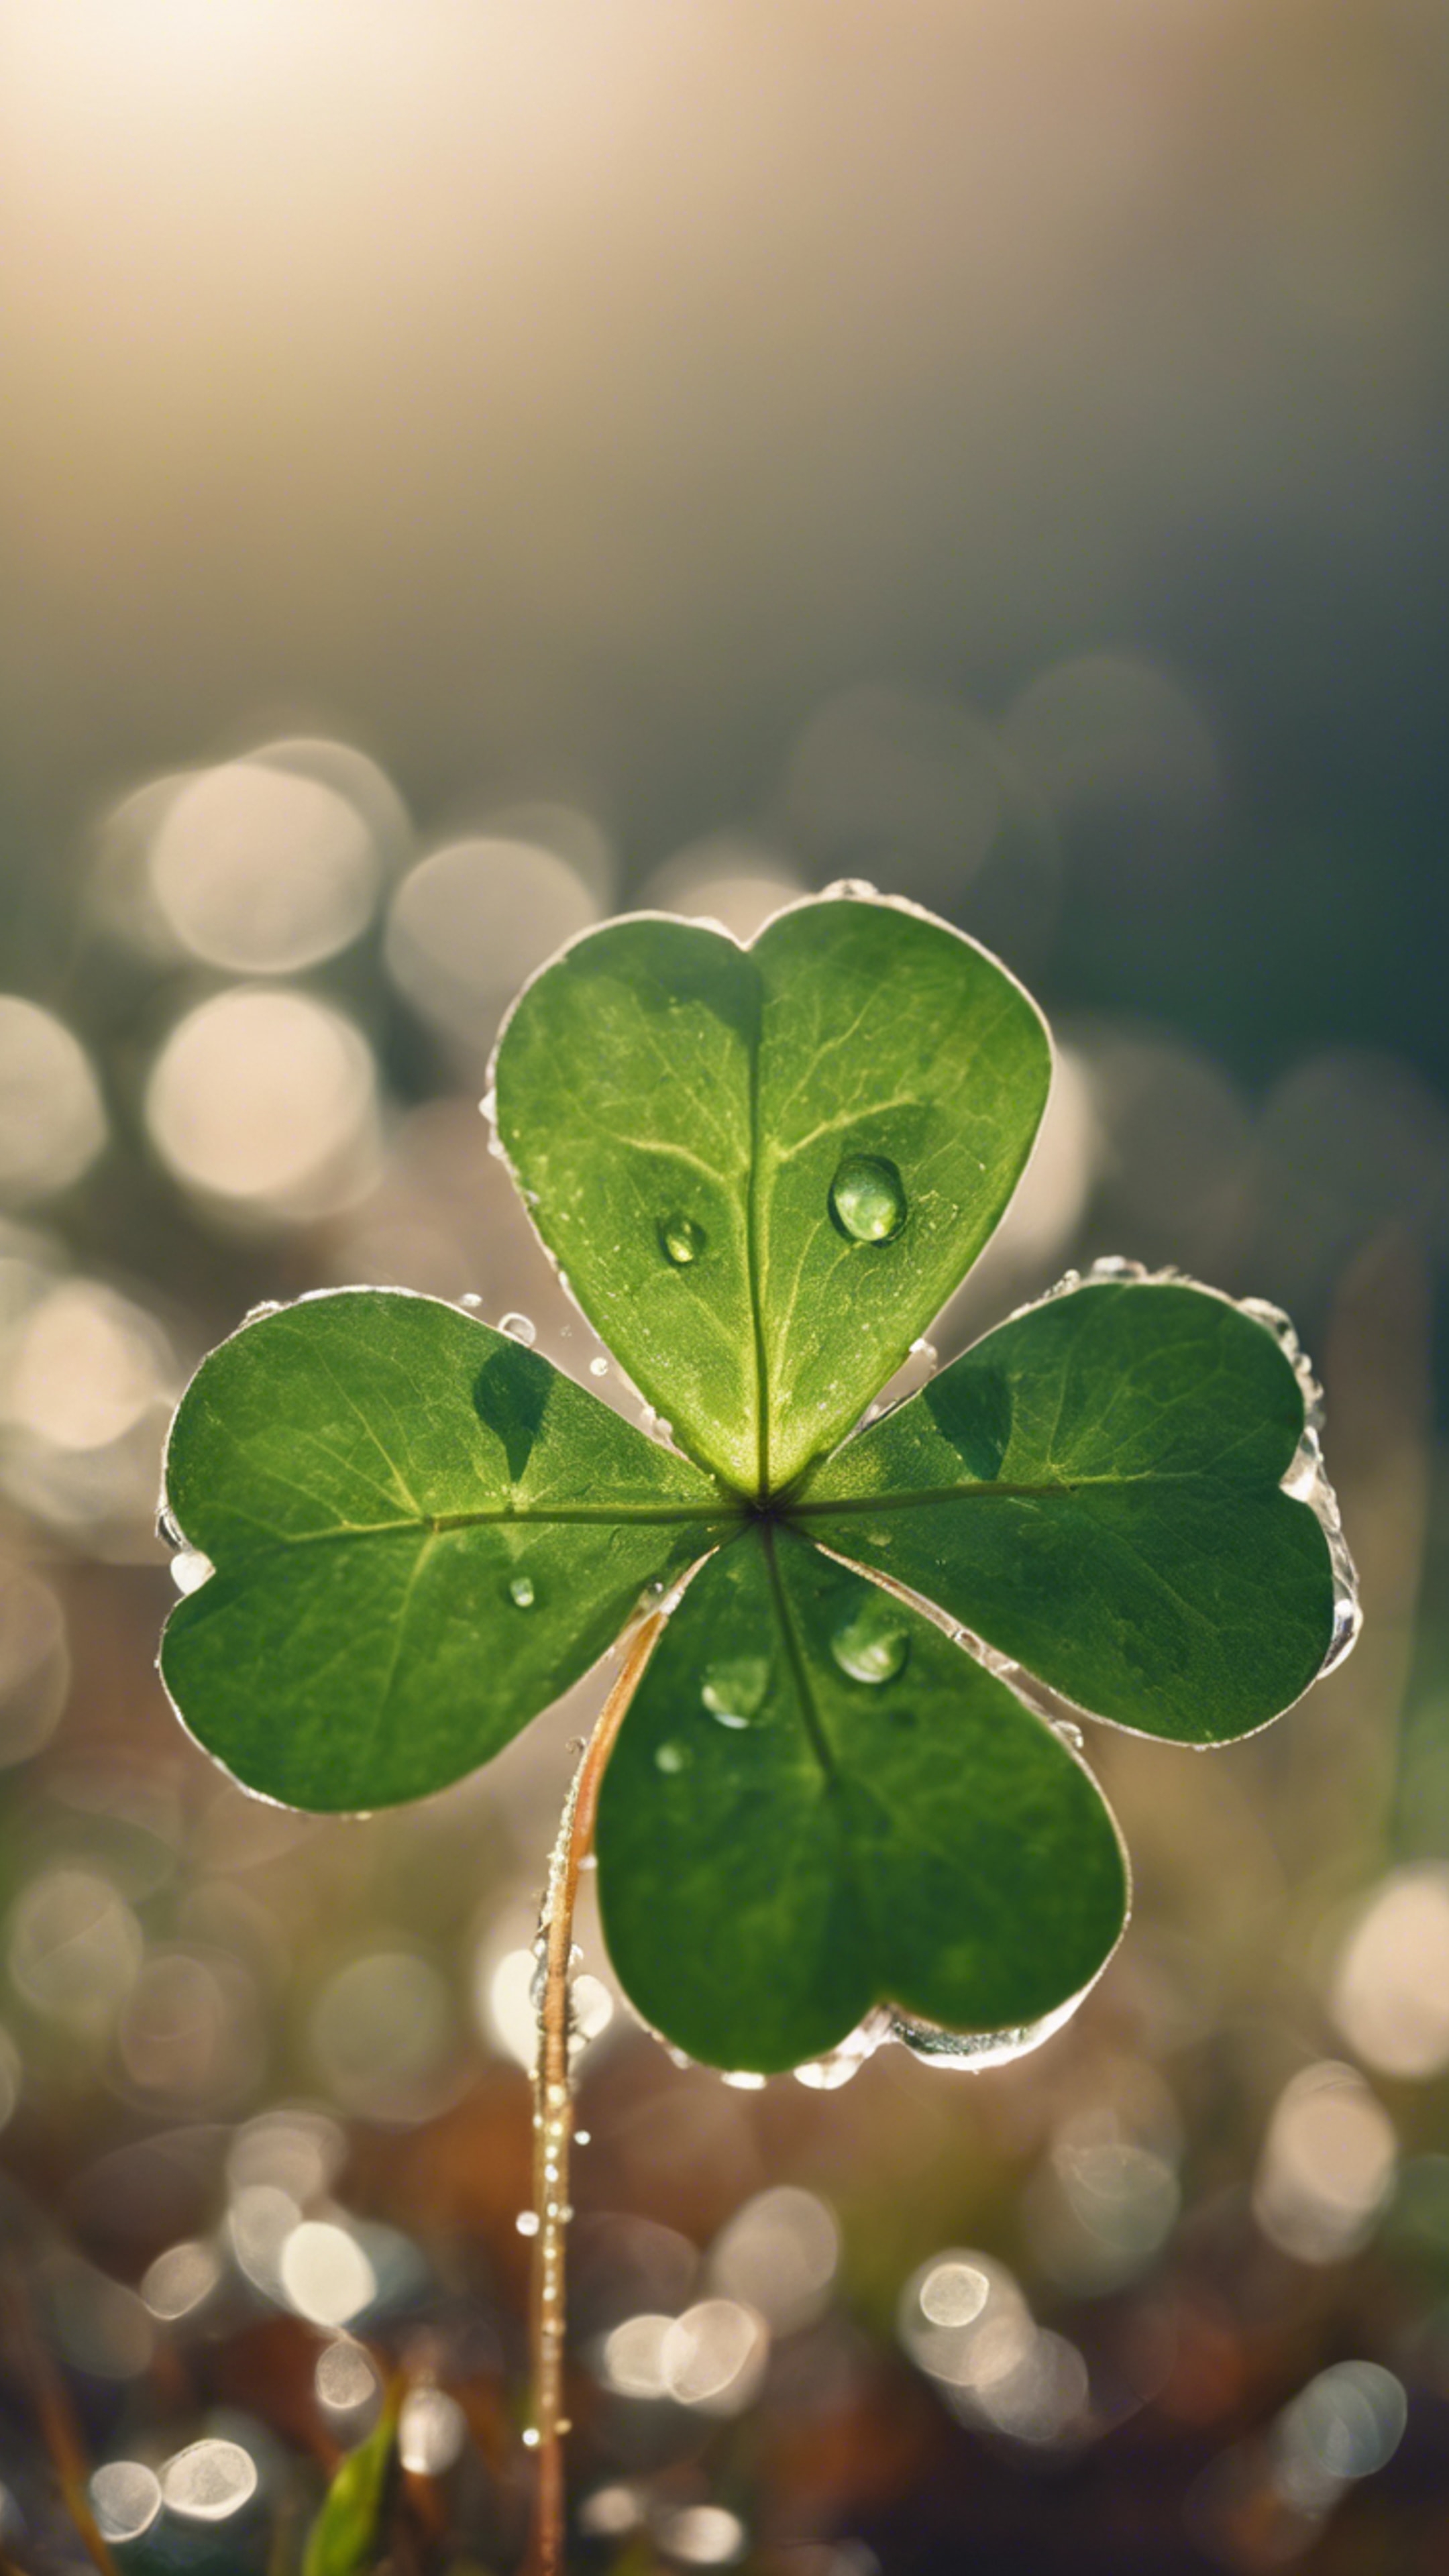 A close-up view of a four leaf clover gleaming in the morning dew. Wallpaper[b8d84a1222284df192e8]